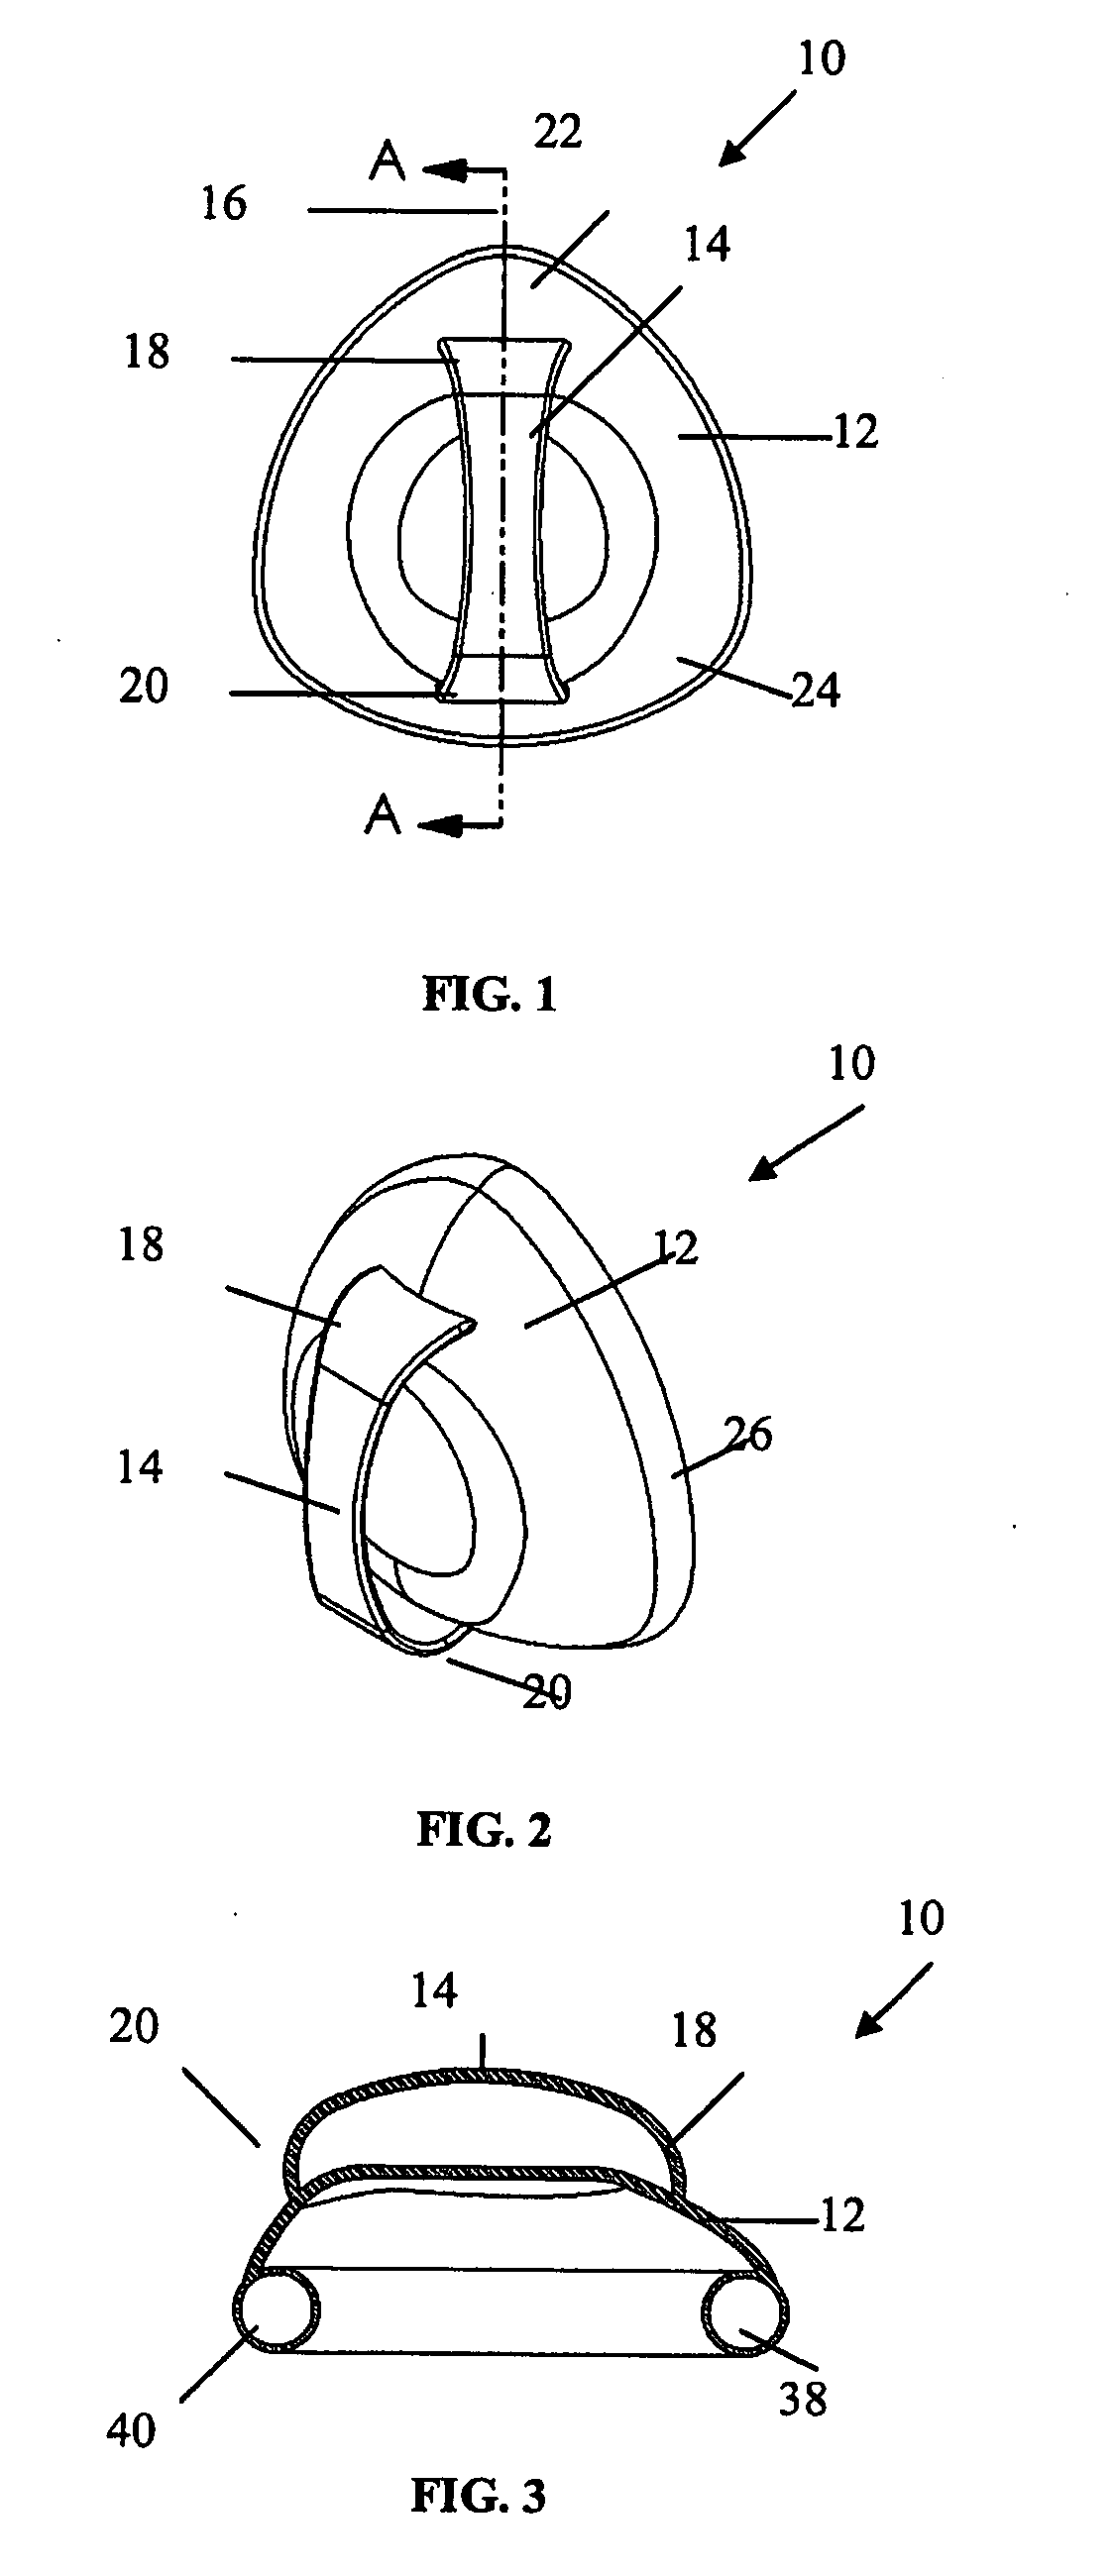 Cough assistance and airway clearance device